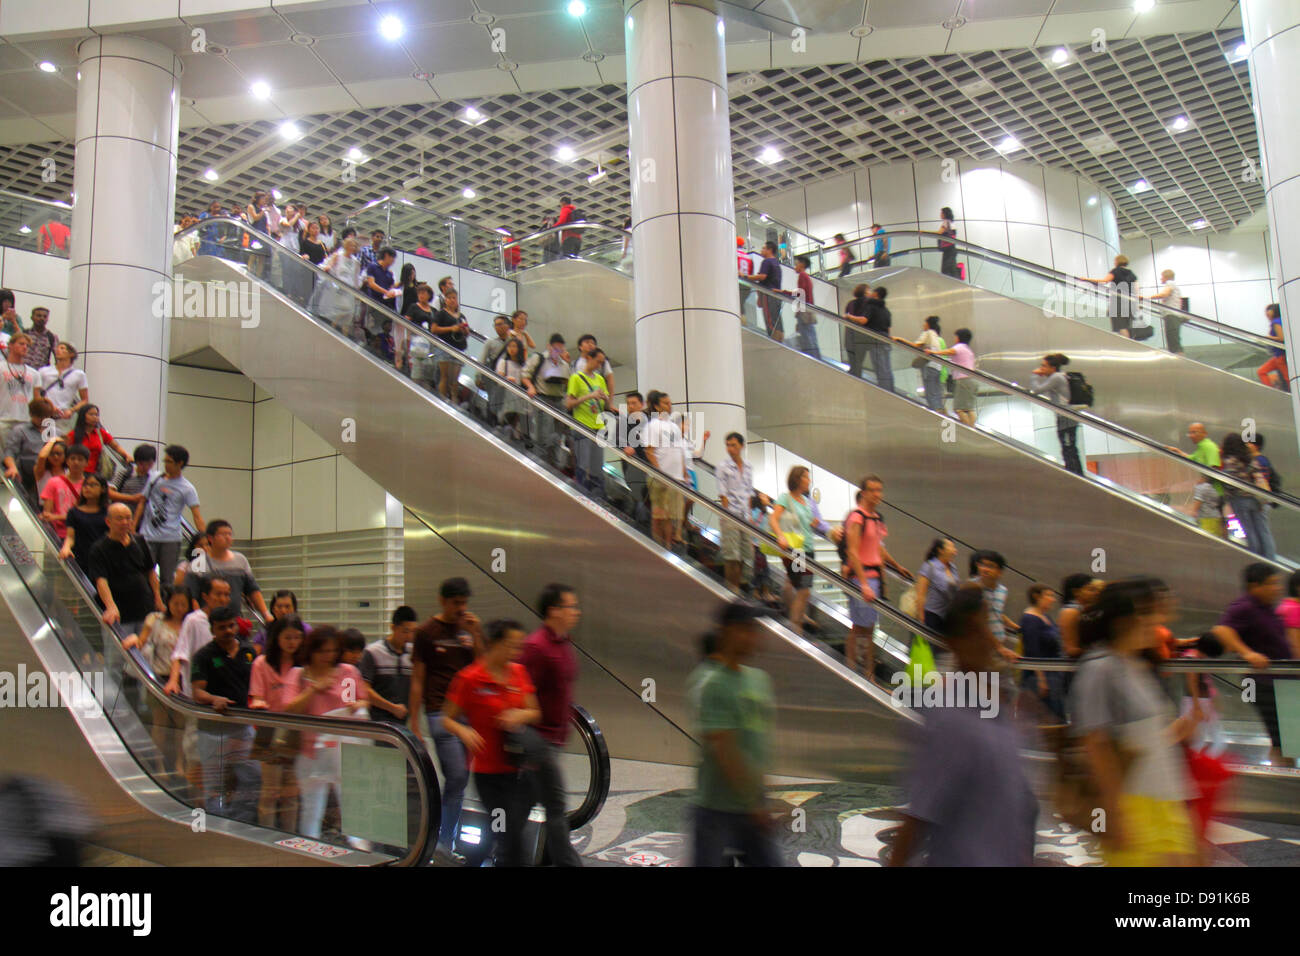 Singapore,Dhoby Ghaut MRT Station,North South Line,subway train,public transportation,escalator,riders,commuters,Asian Asians ethnic immigrant immigra Stock Photo